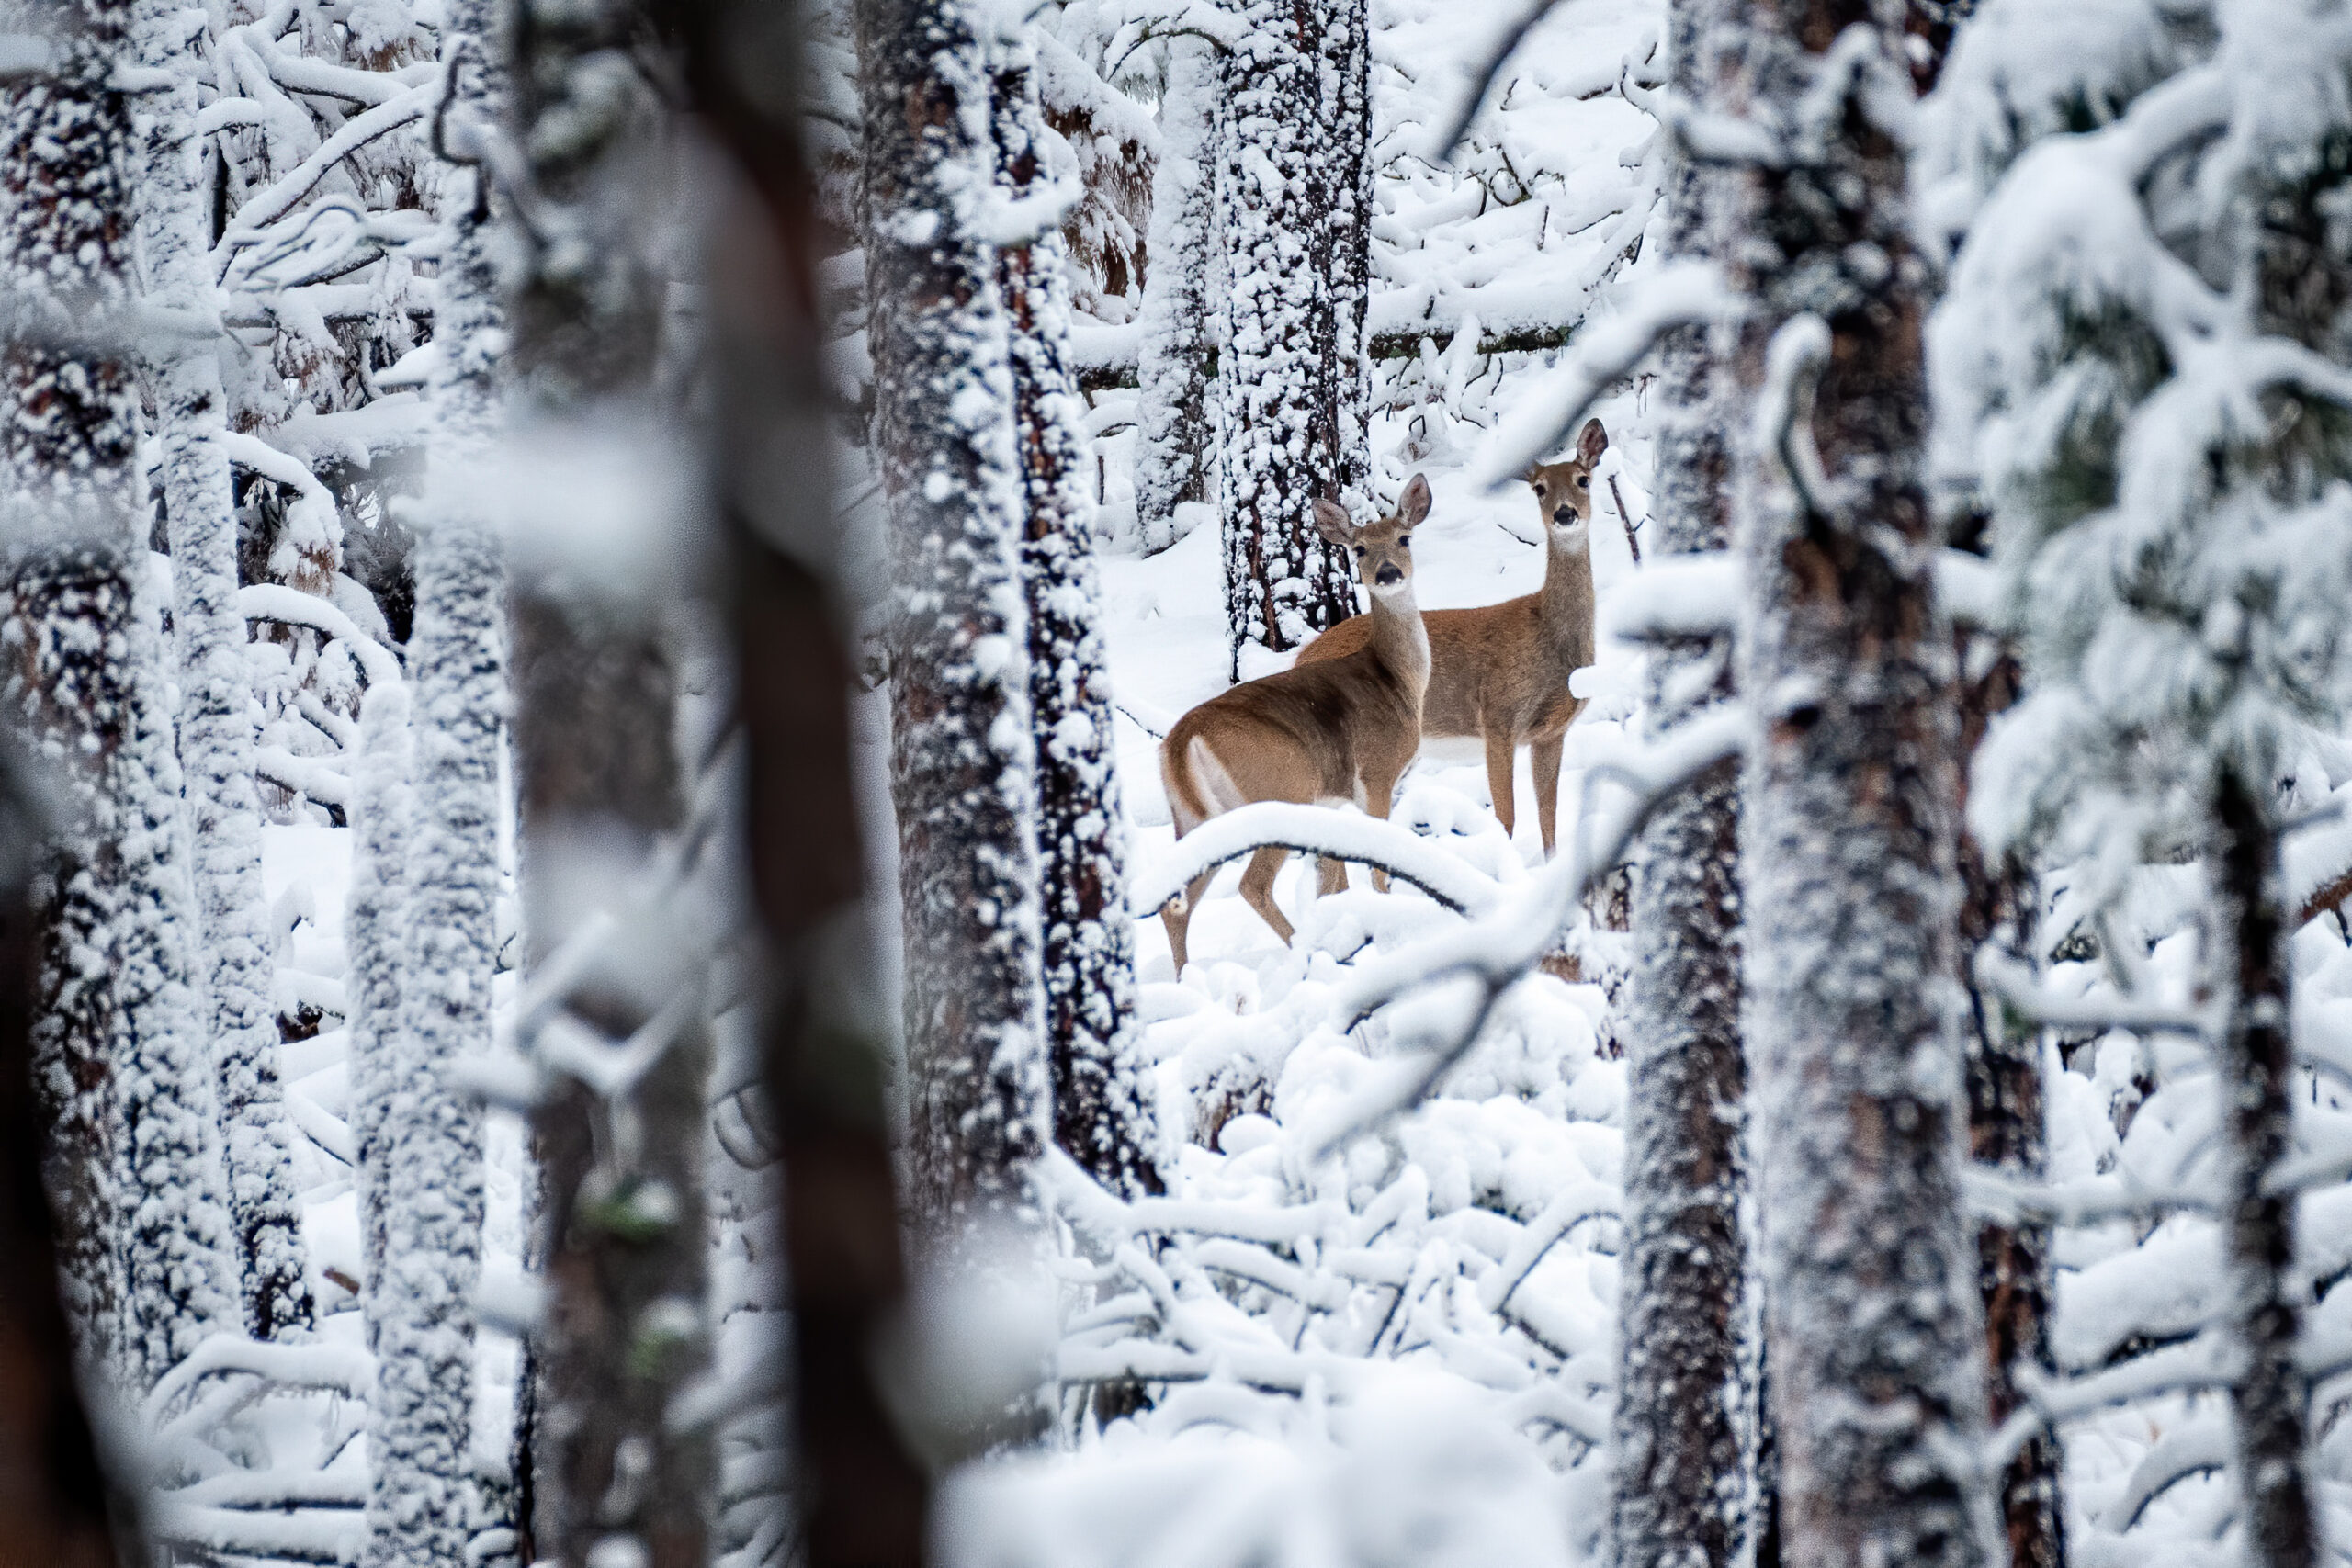 A pair of whitetail deer after a heavy snowfall.